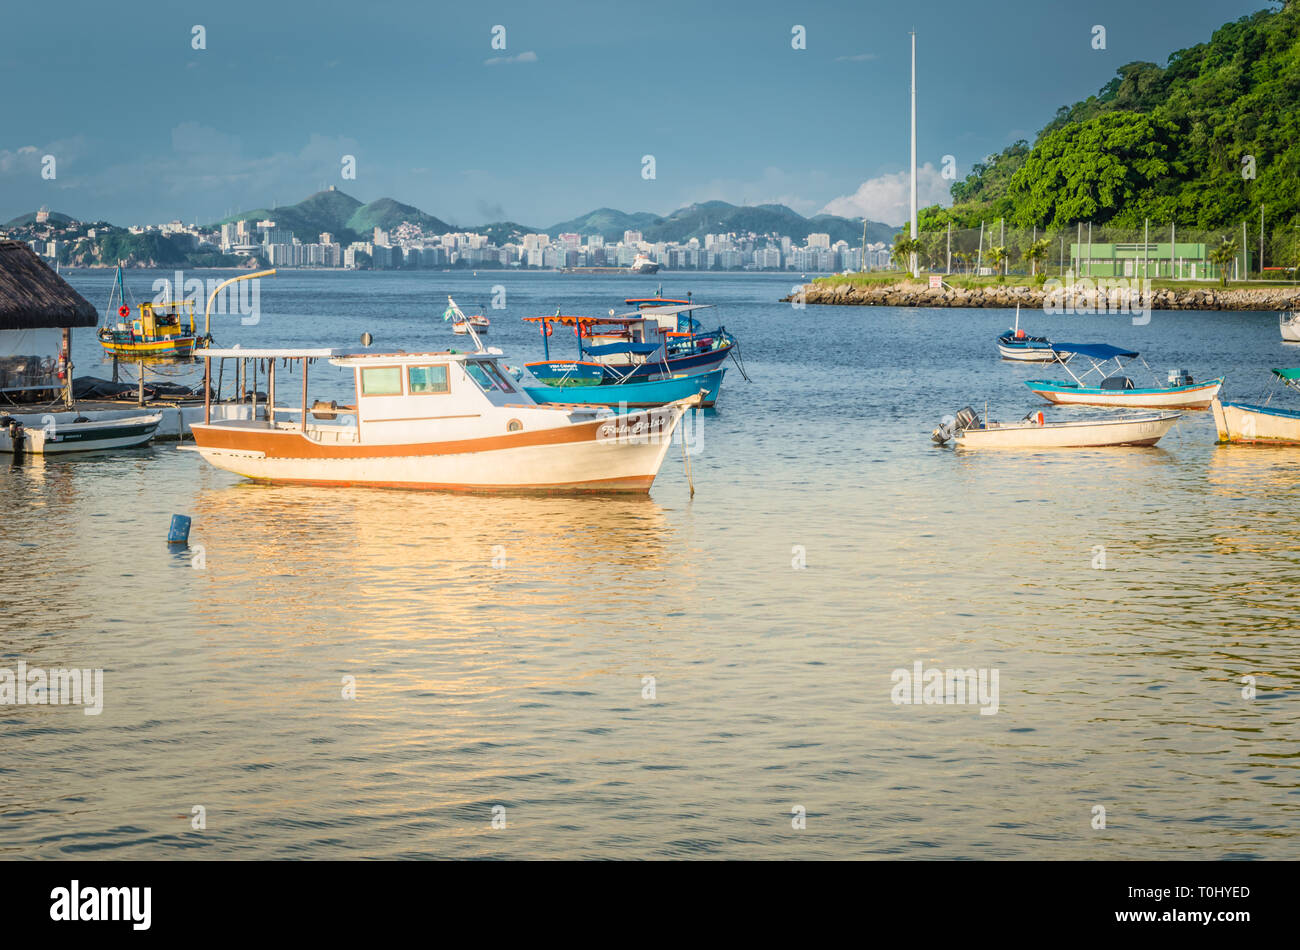 20+ Rio De Janeiro Yacht Club Stock Photos, Pictures & Royalty-Free Images  - iStock